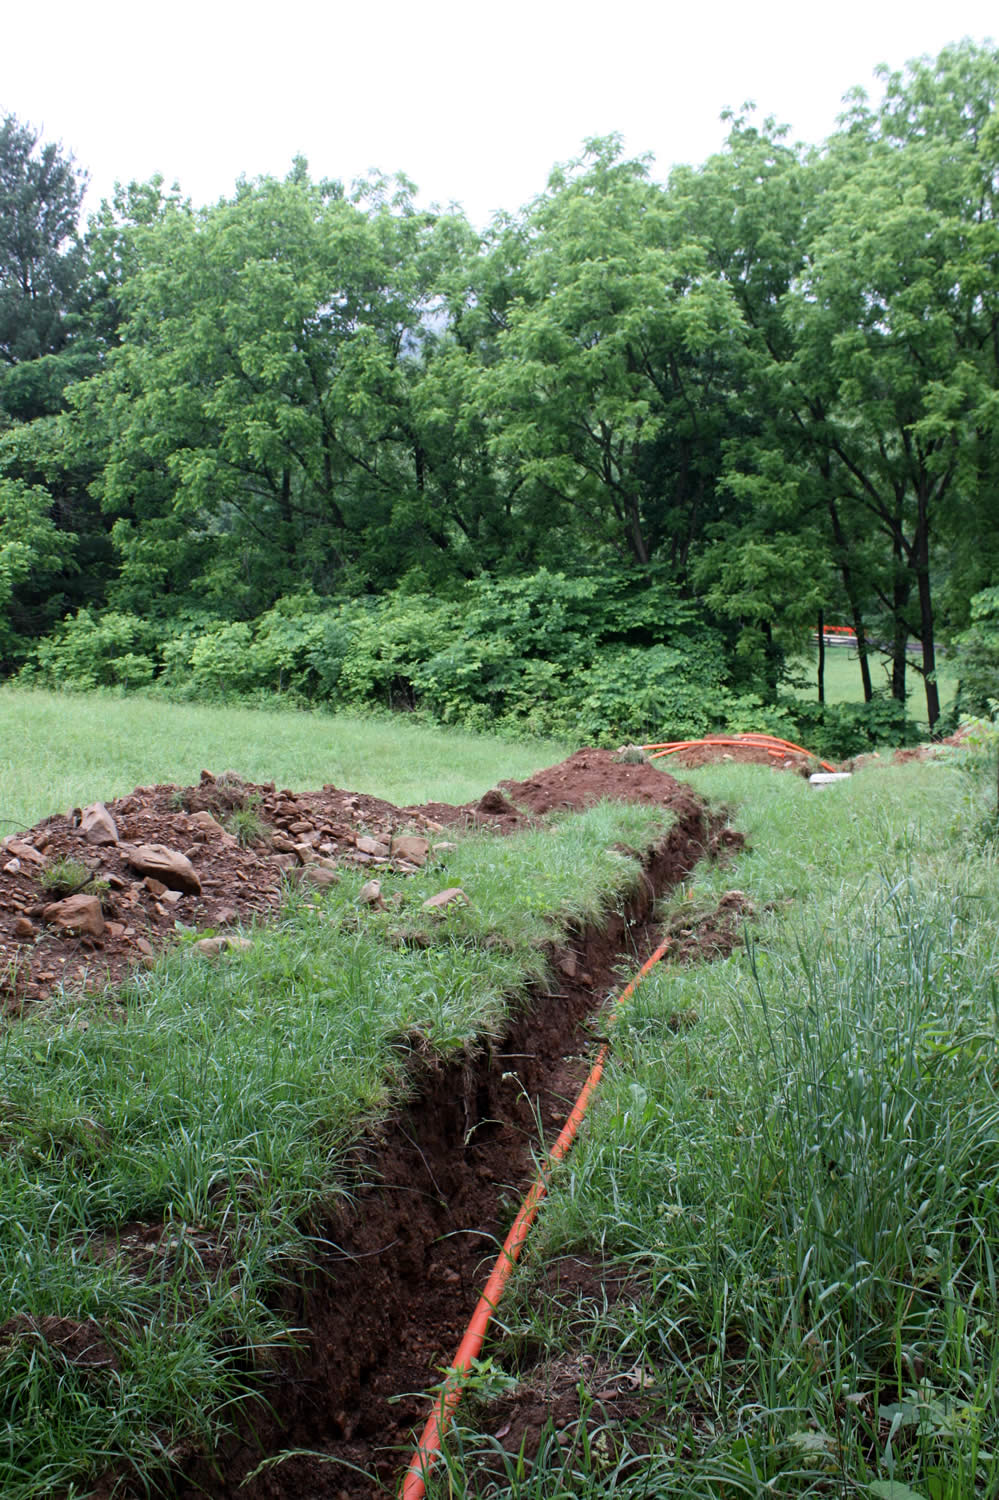 View of trench and conduit along Bodhi Way